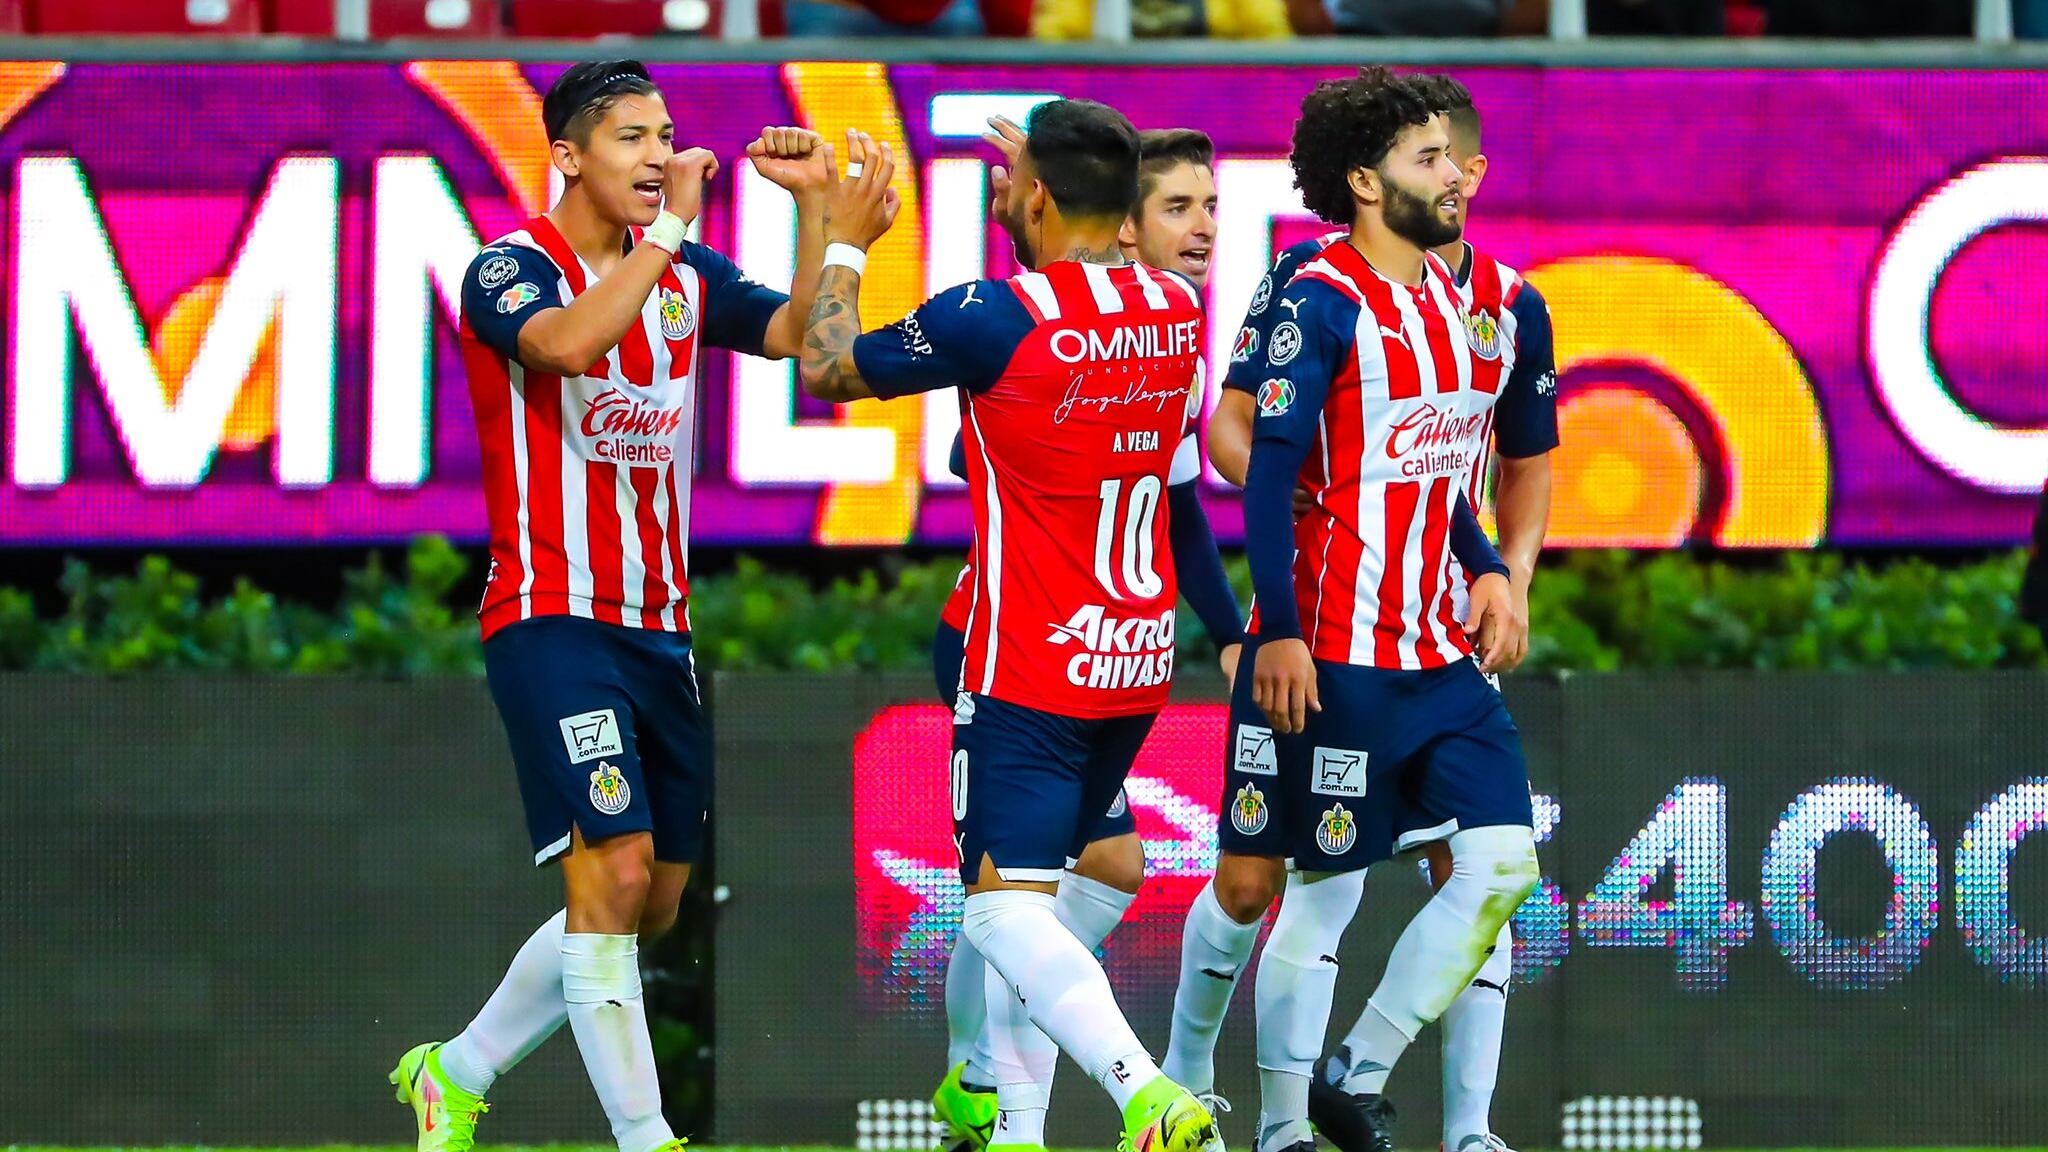 Chivas surprises everyone with a 3-0 victory over Mazatlán in Clausura 2022’s first game